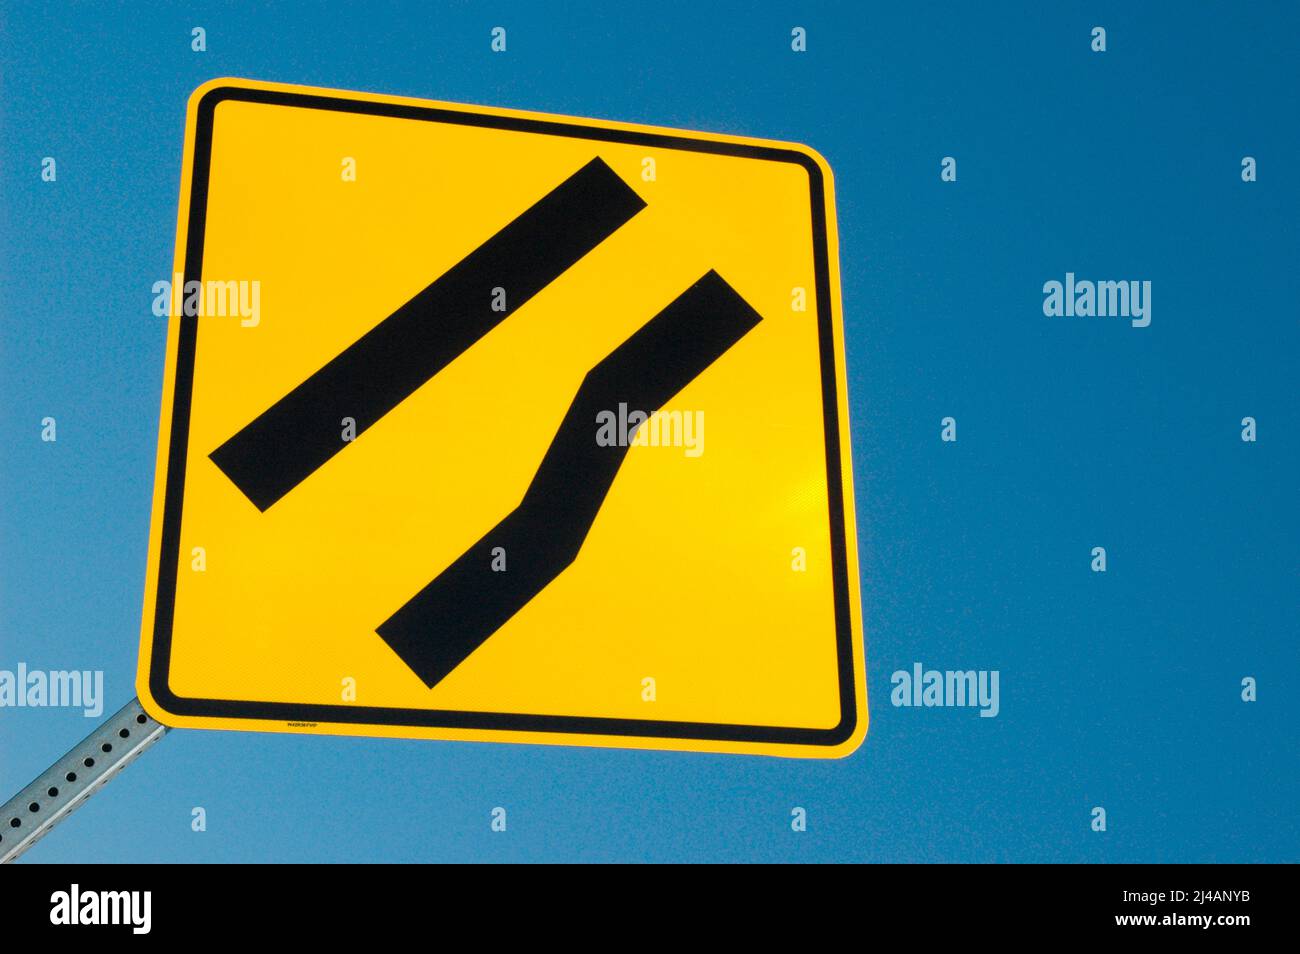 Freeway sign showing merge left as lane ends Stock Photo